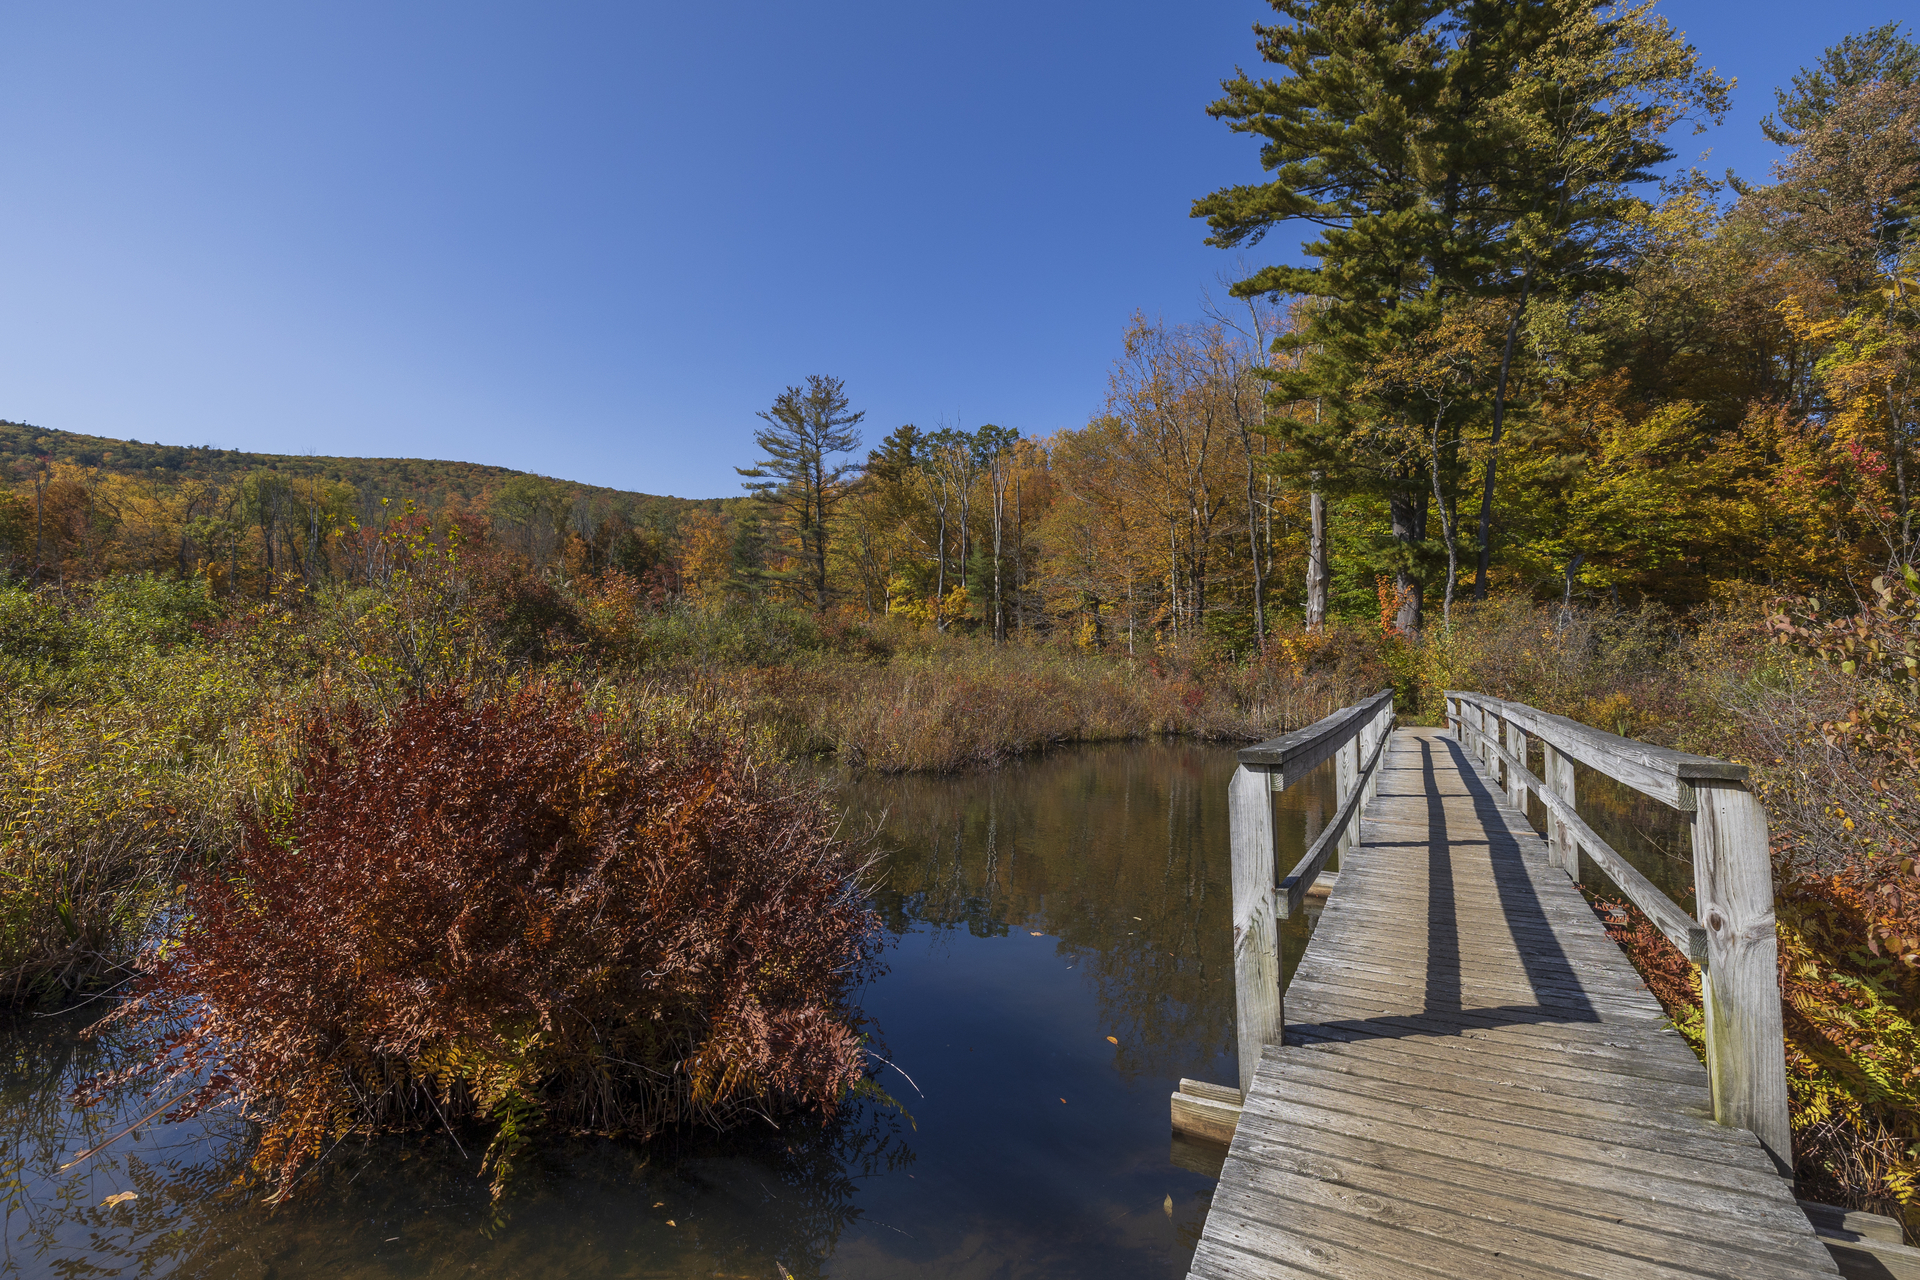 A wooden bridge with rails over a calm, marshy pond. A forest with fall foliage surrounds the pond.